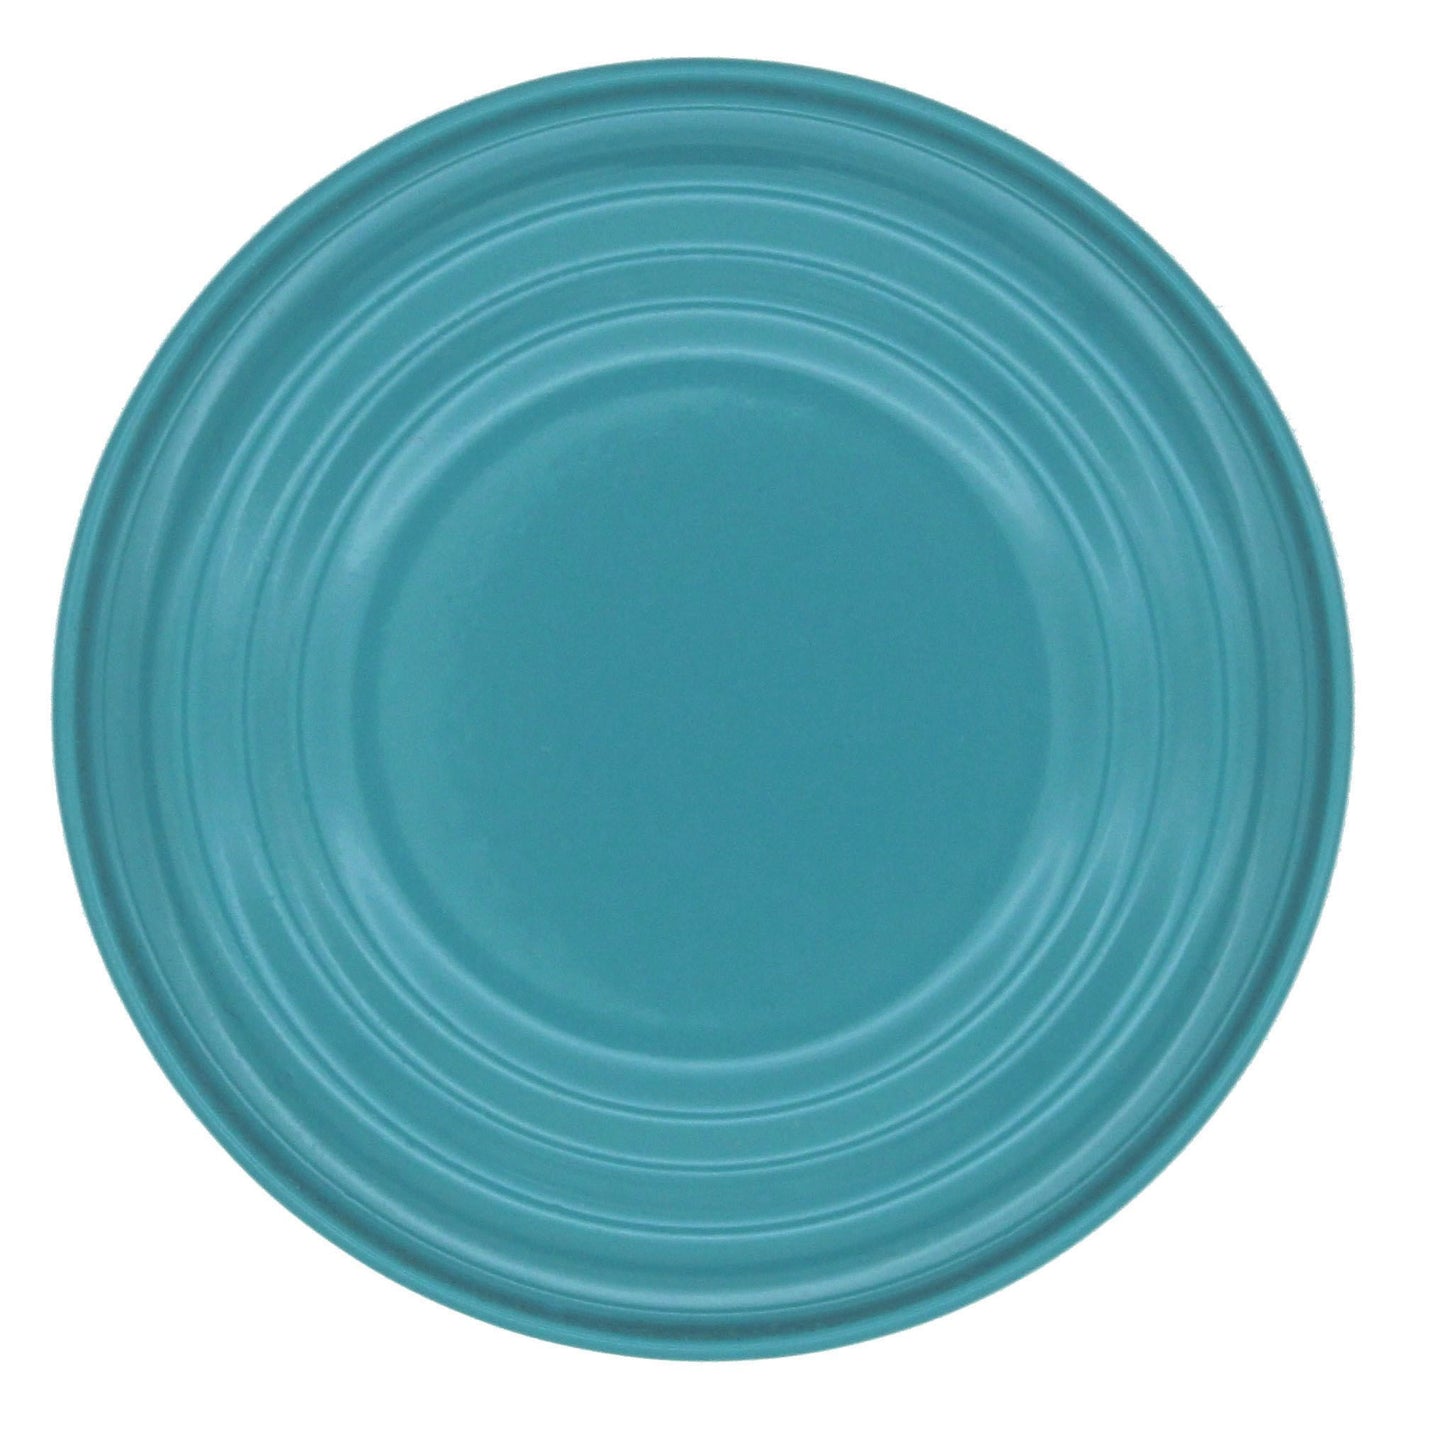 RAL 5018 - Turquoise Blue